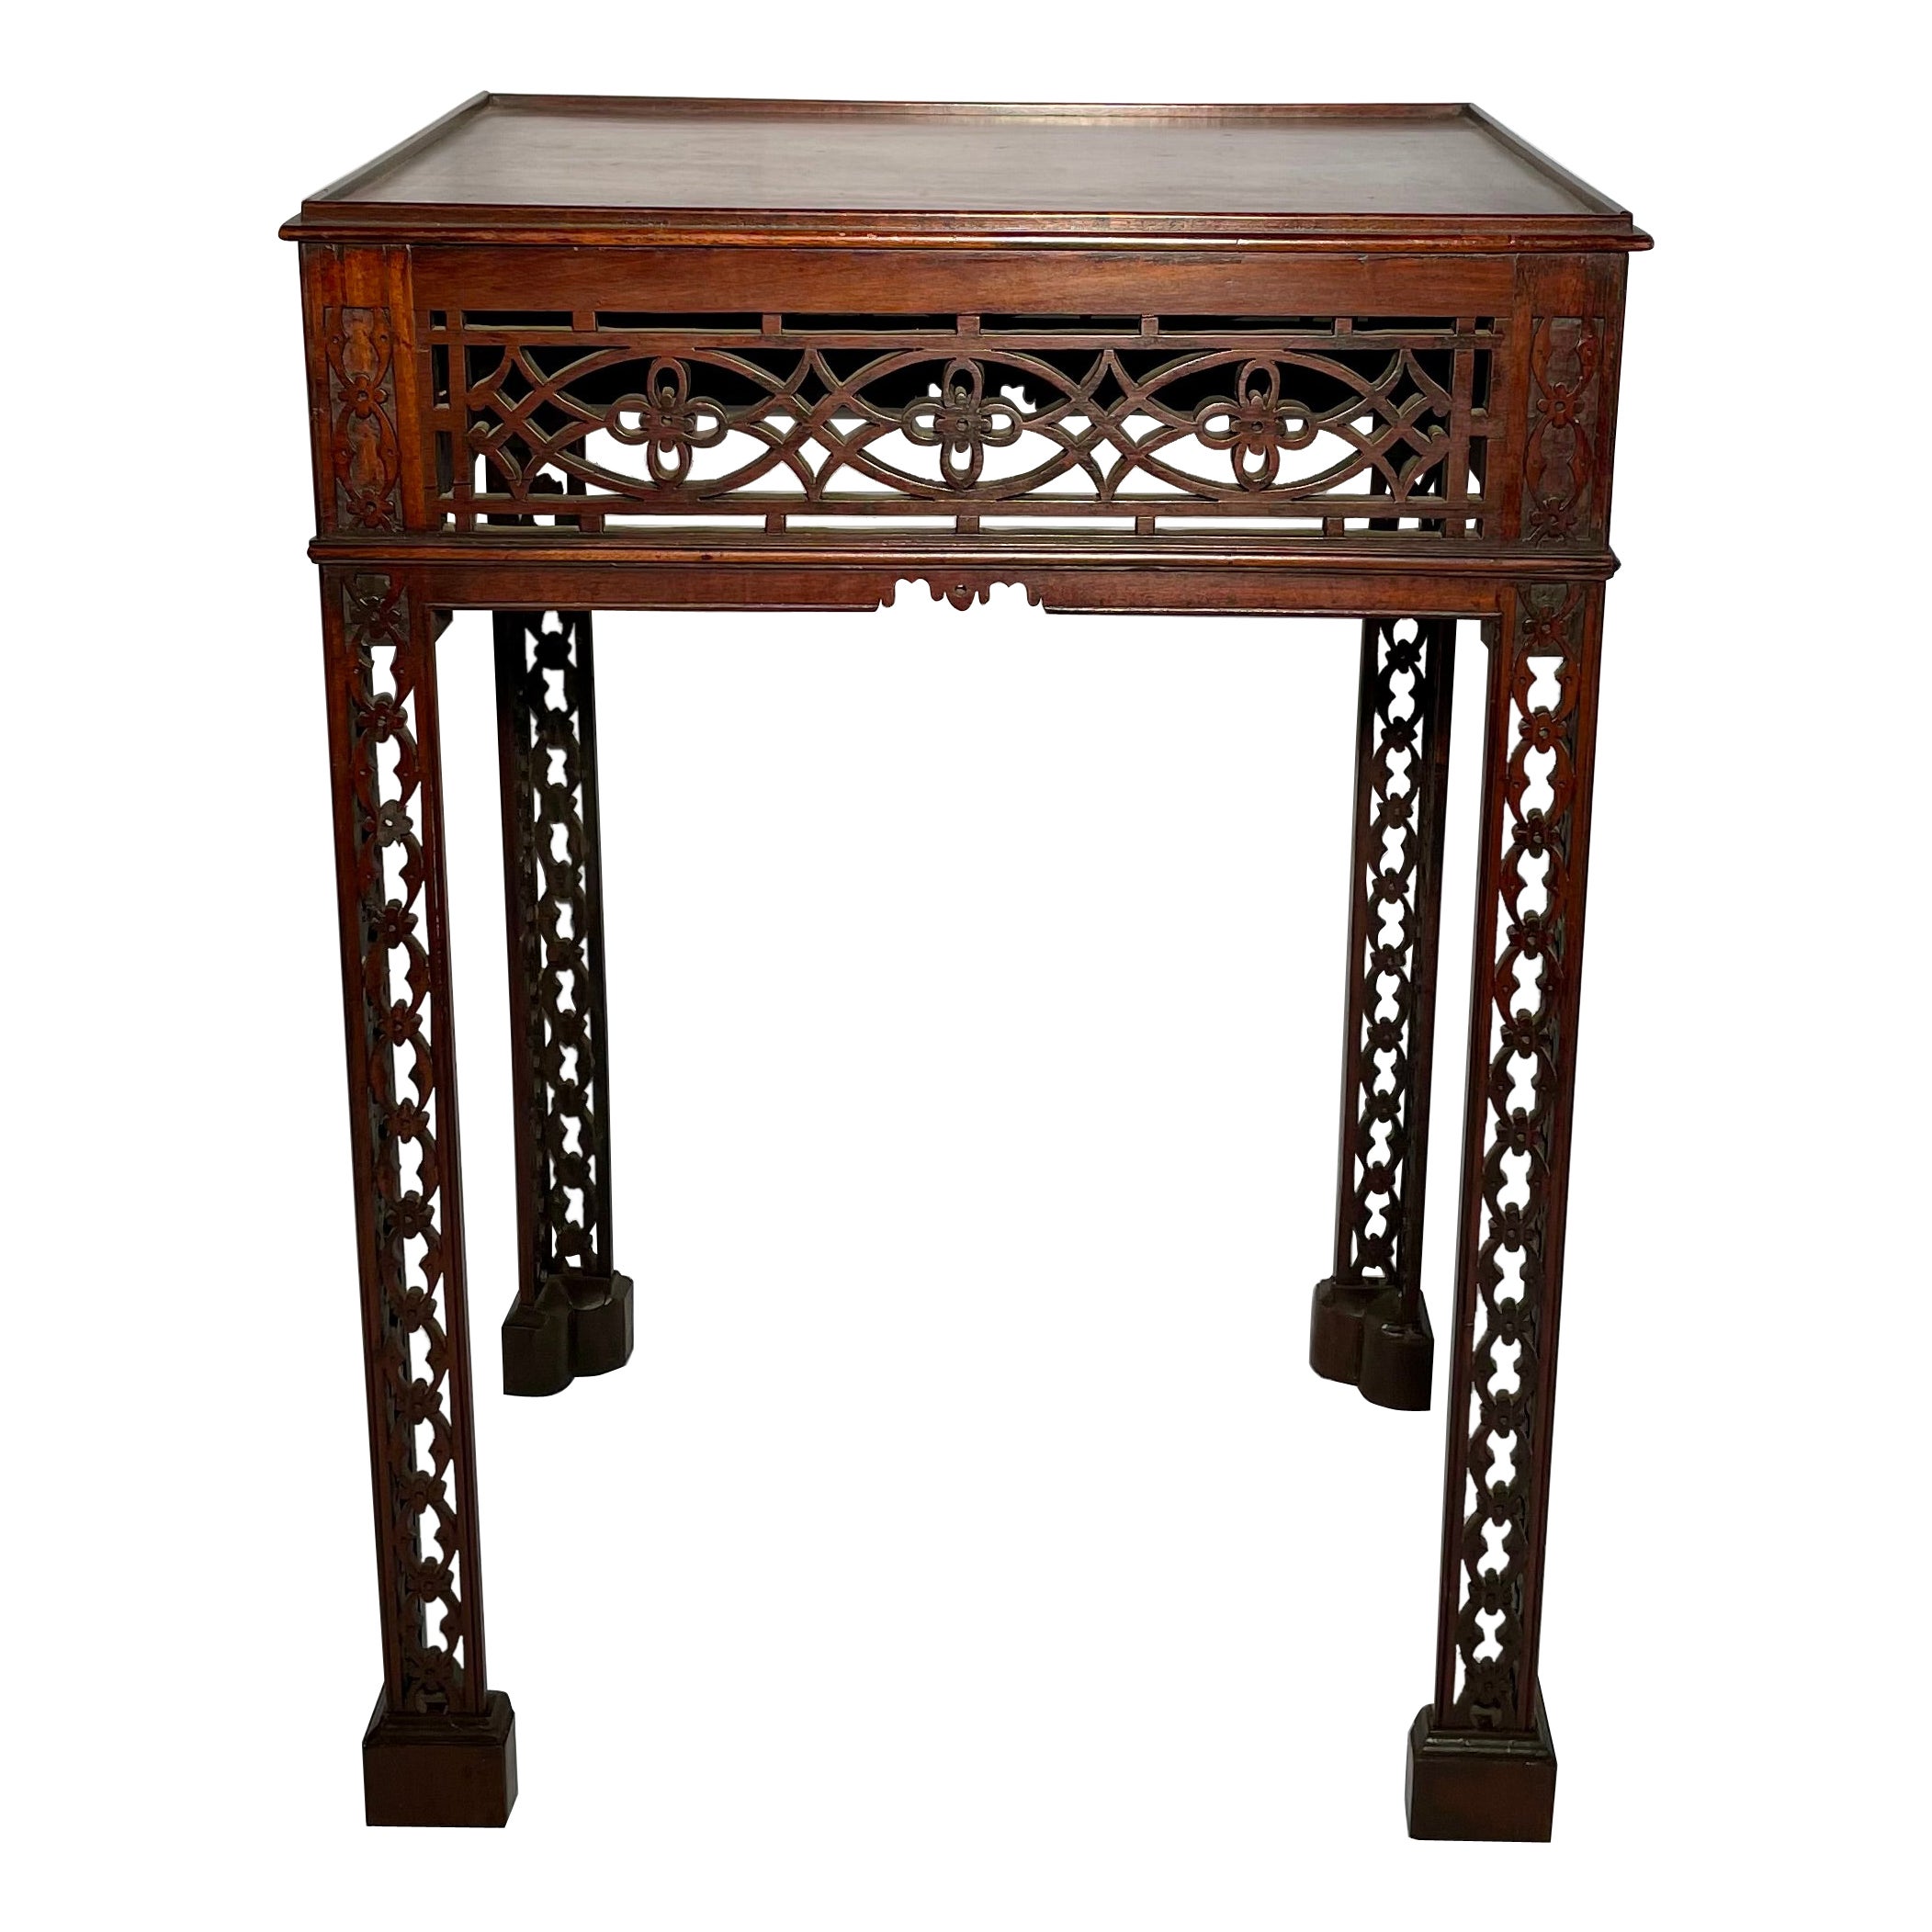 Antique English Mahogany Tea Table with Chippendale Fretwork, Circa 1880. For Sale